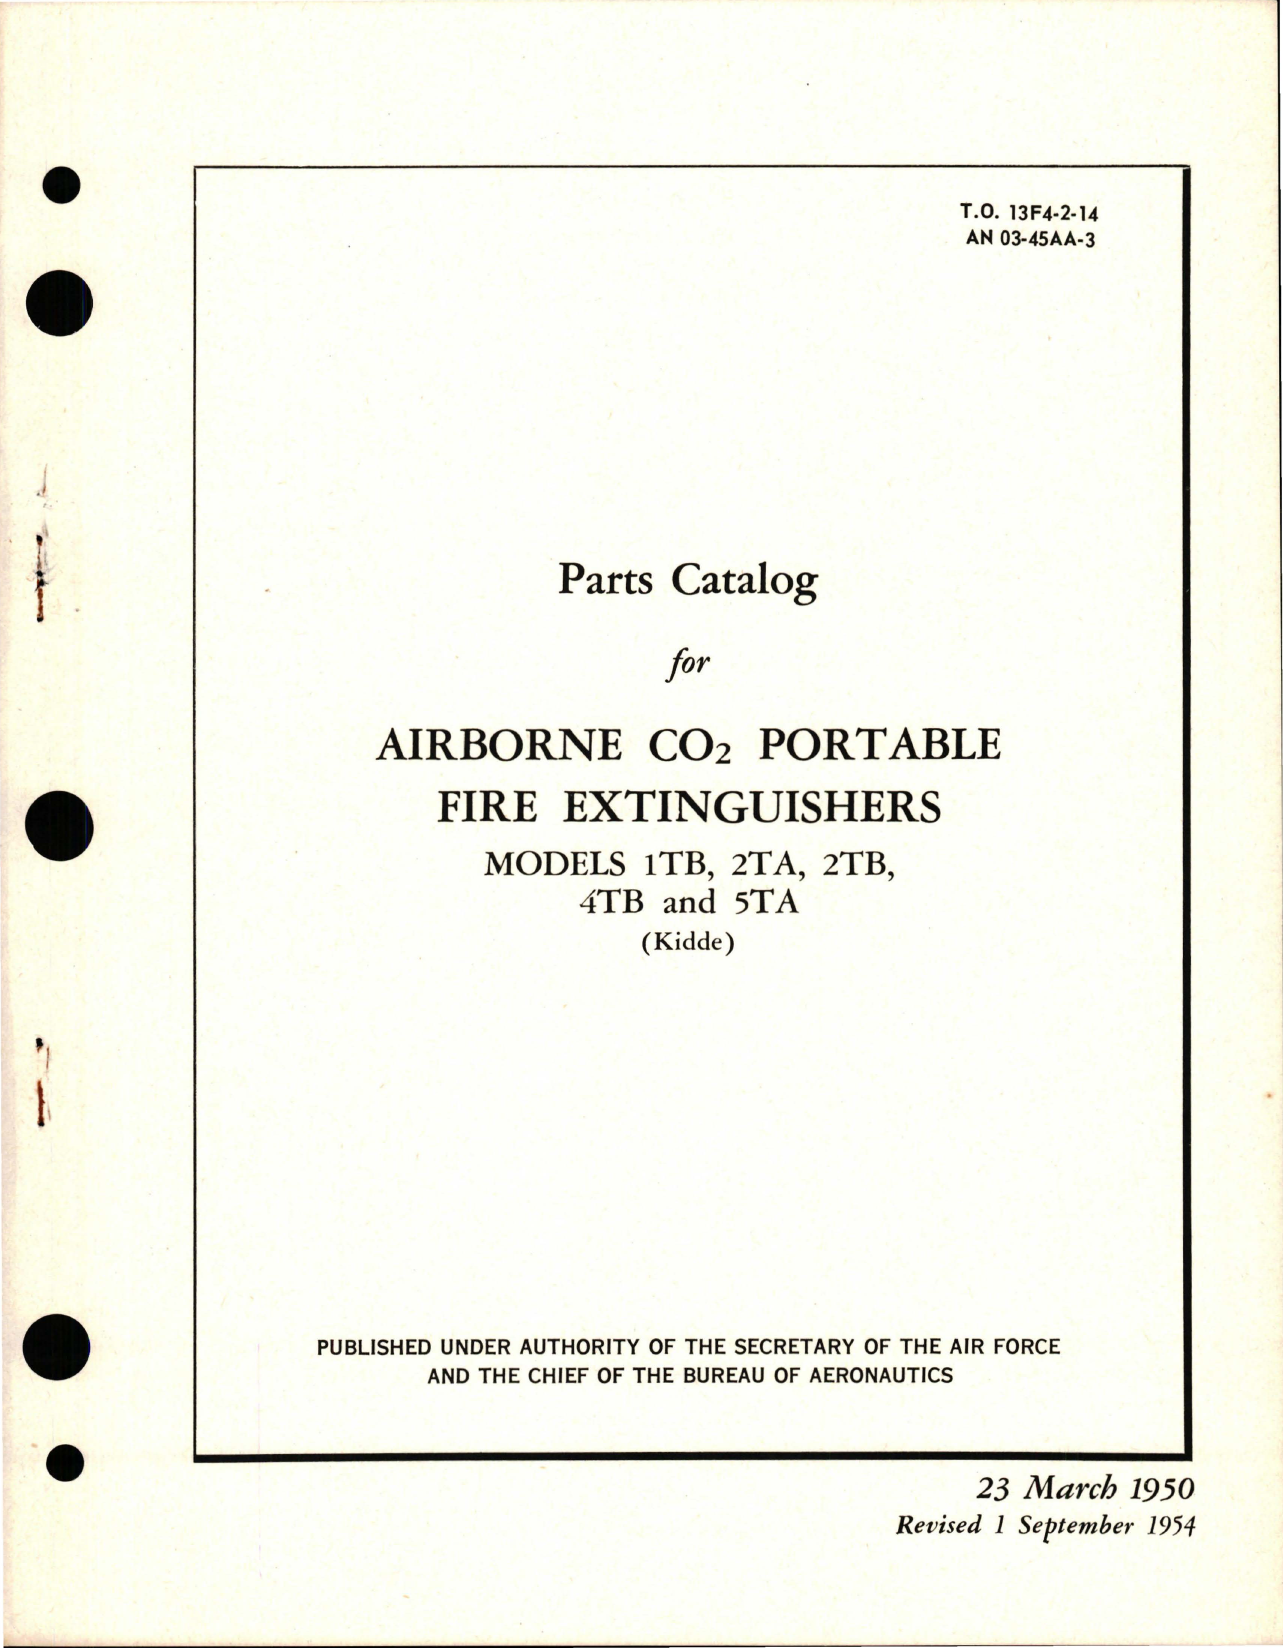 Sample page 1 from AirCorps Library document: Parts Catalog for CO2 Portable Fire Extinguishers - Models 1TB, 2TA, 2TB, 4TB, and 5TA 